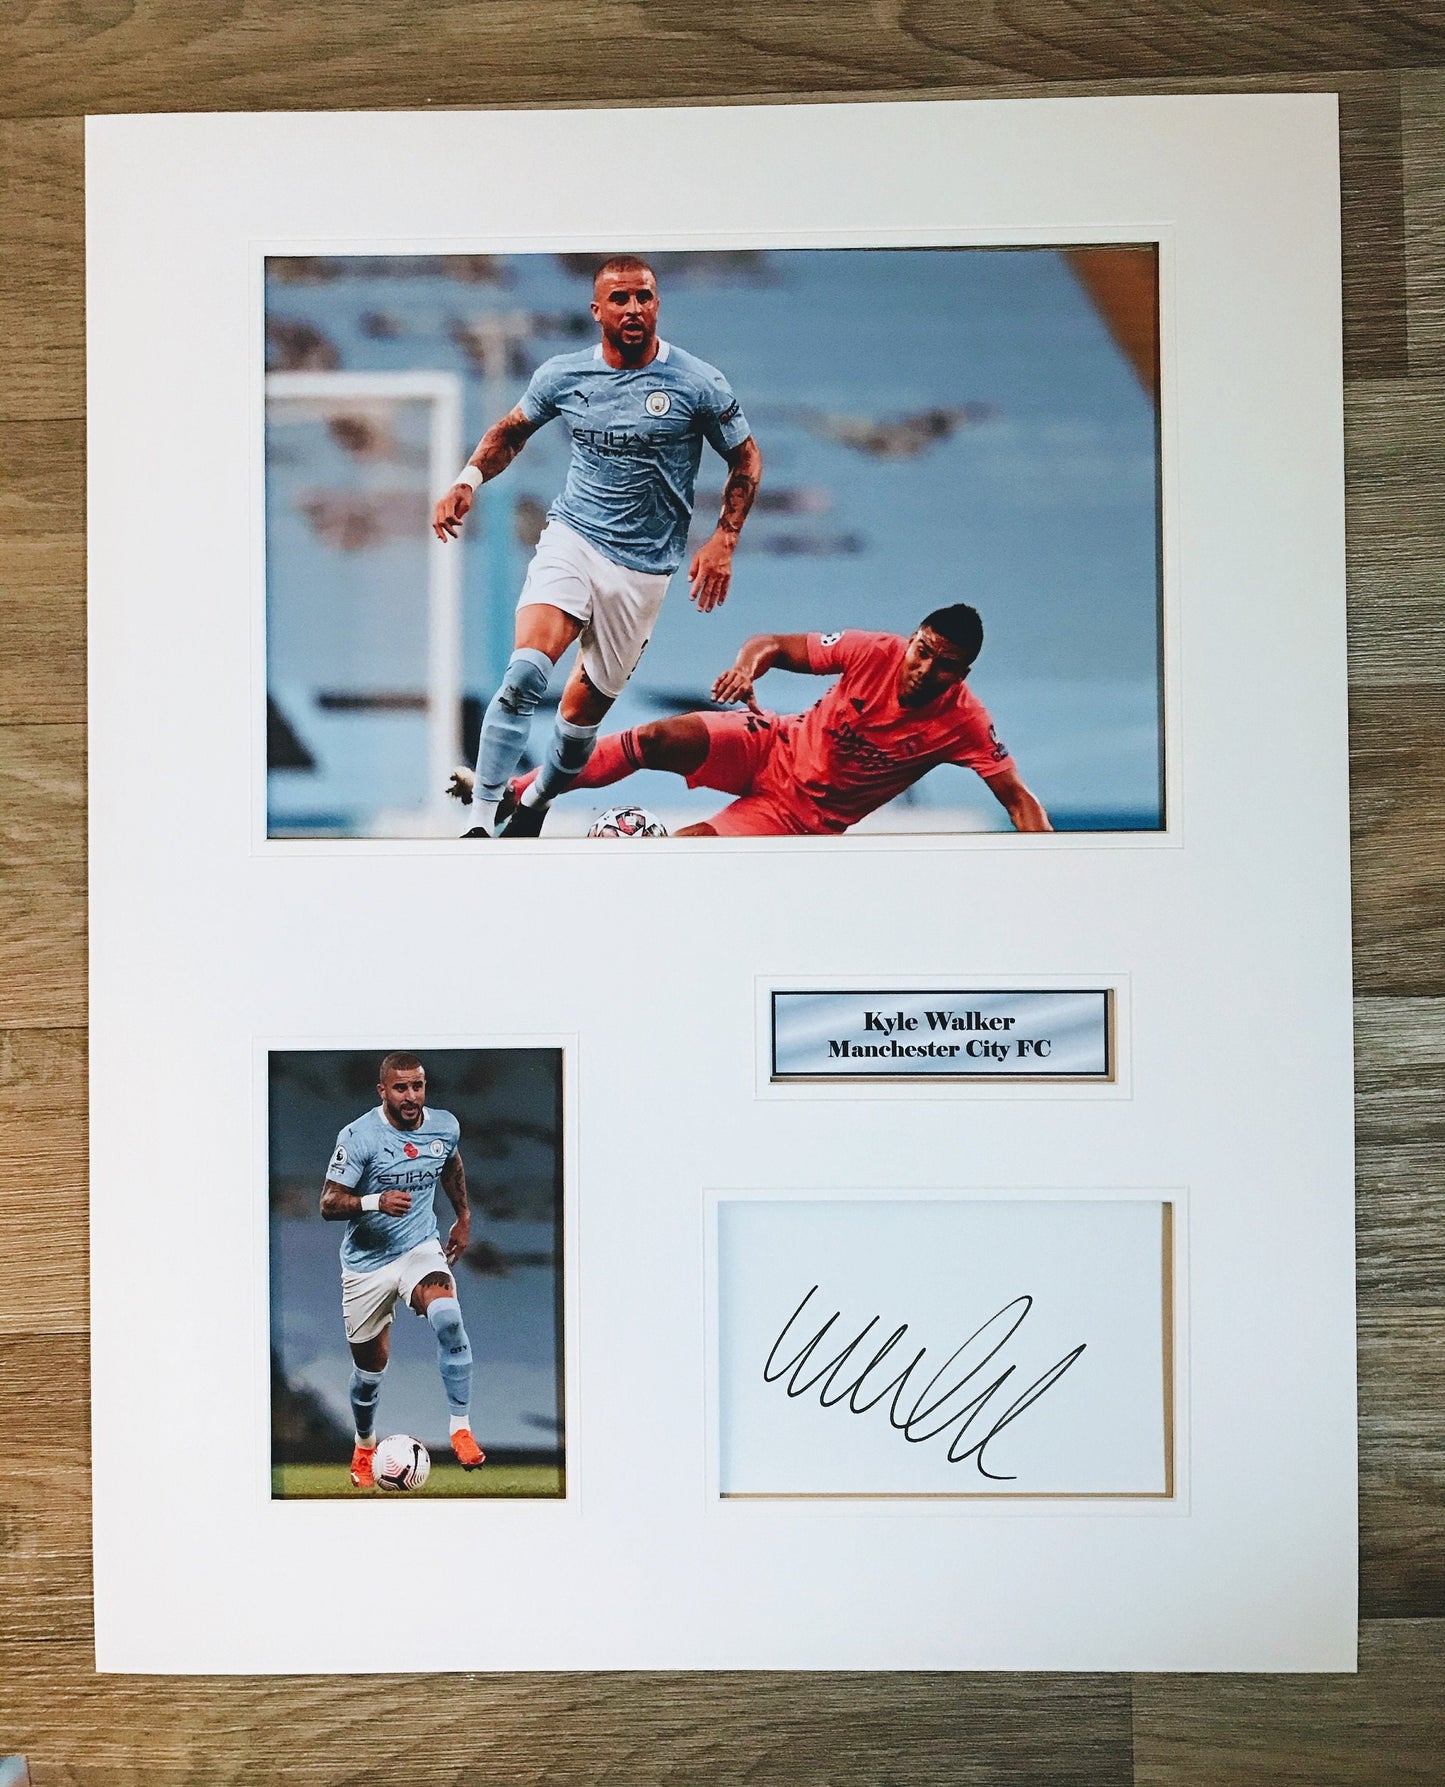 Kyle Walker - Manchester City FC - 20x16in signed photo montage - City memorabilia, gift, display